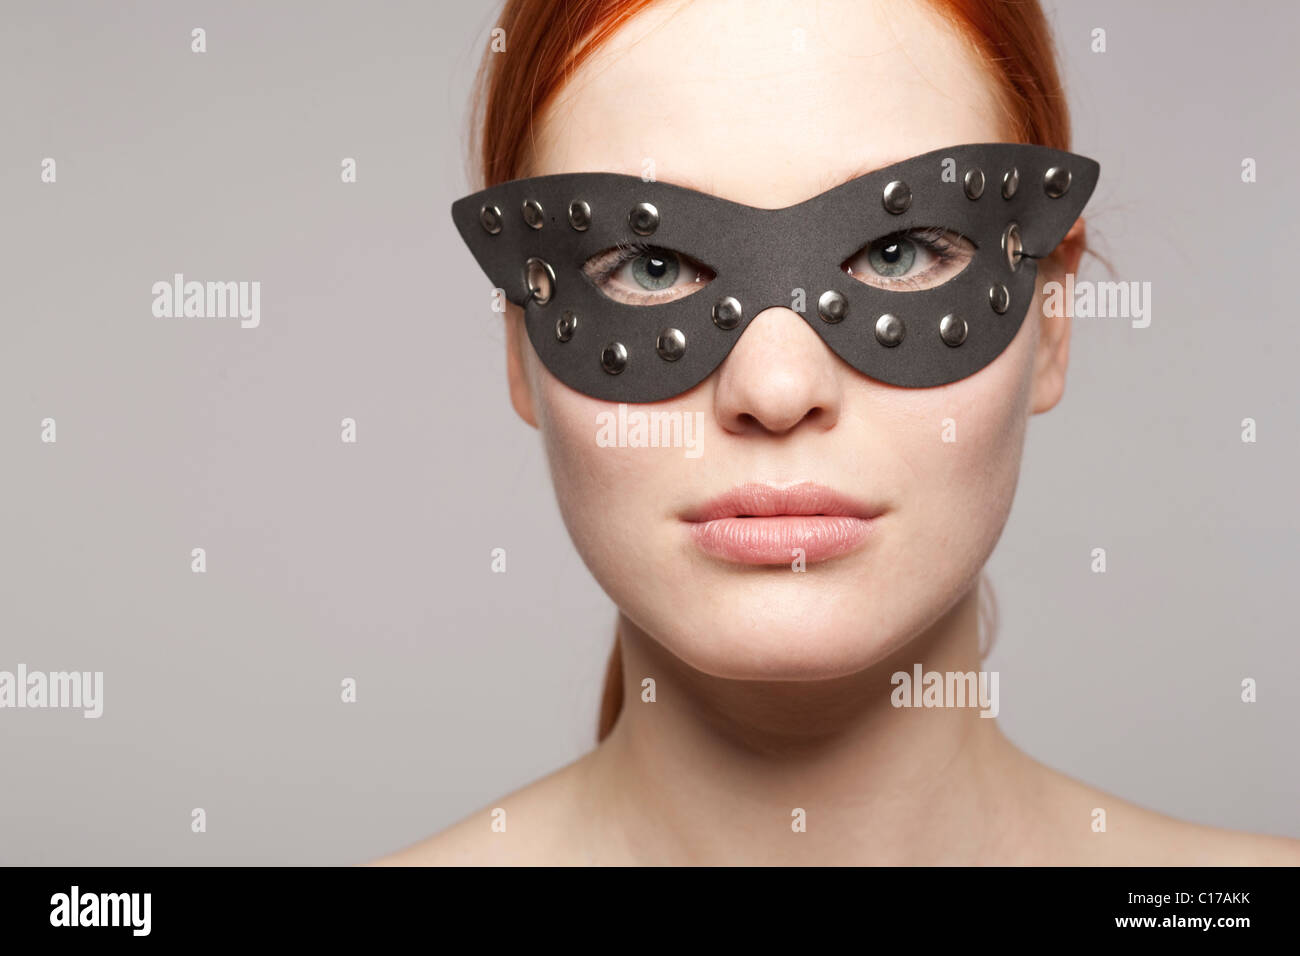 Young red-haired woman wearing a black leather mask Stock Photo